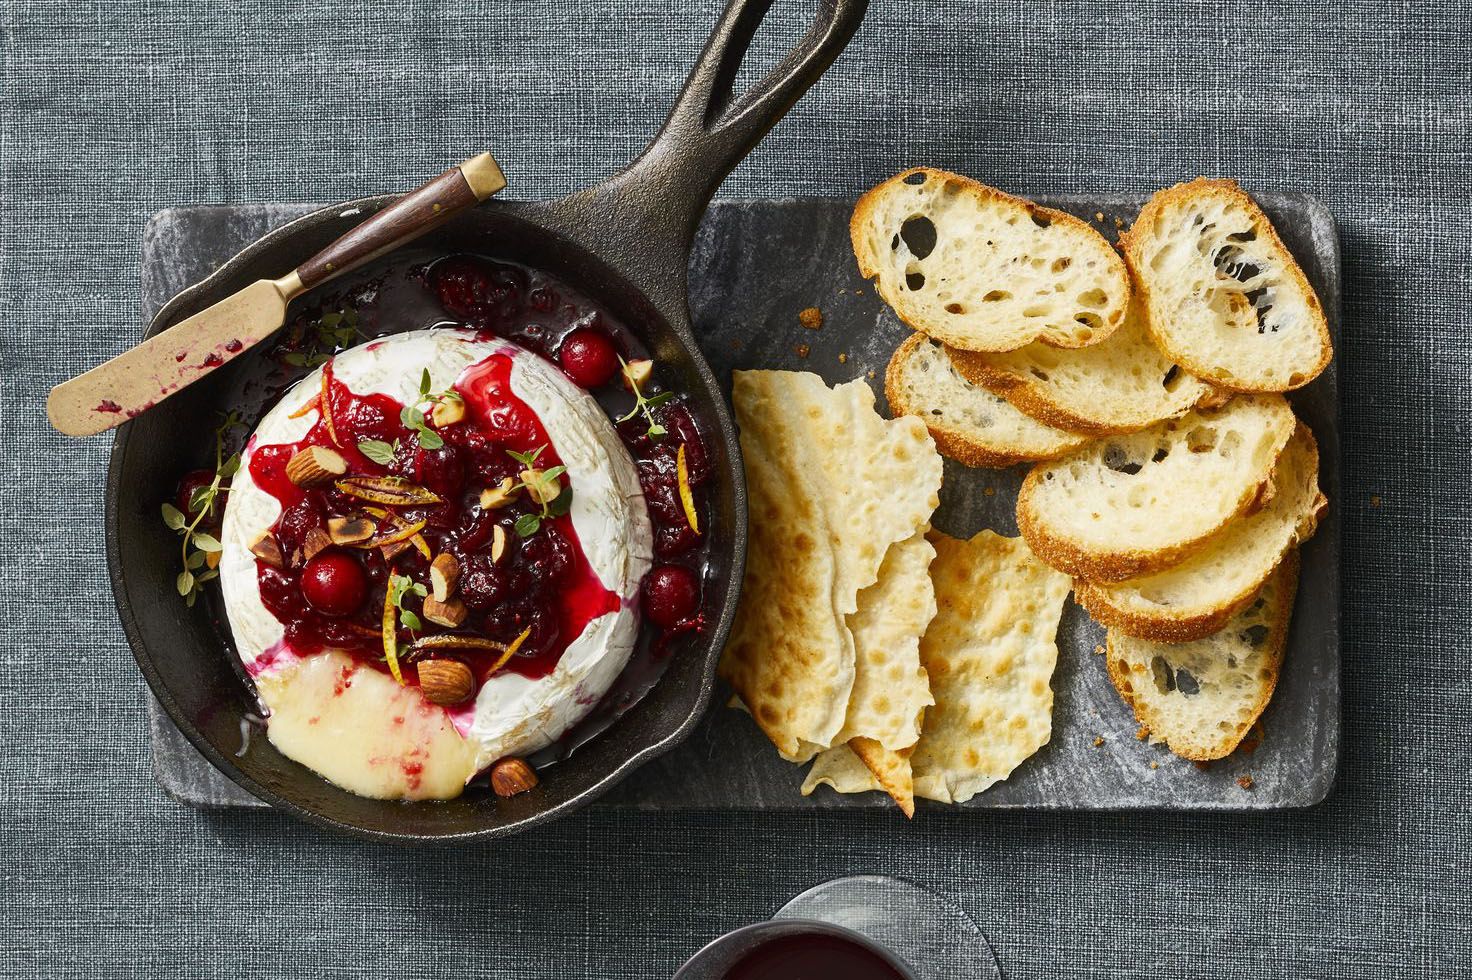 8 Simple Small Plates for Holiday Entertaining